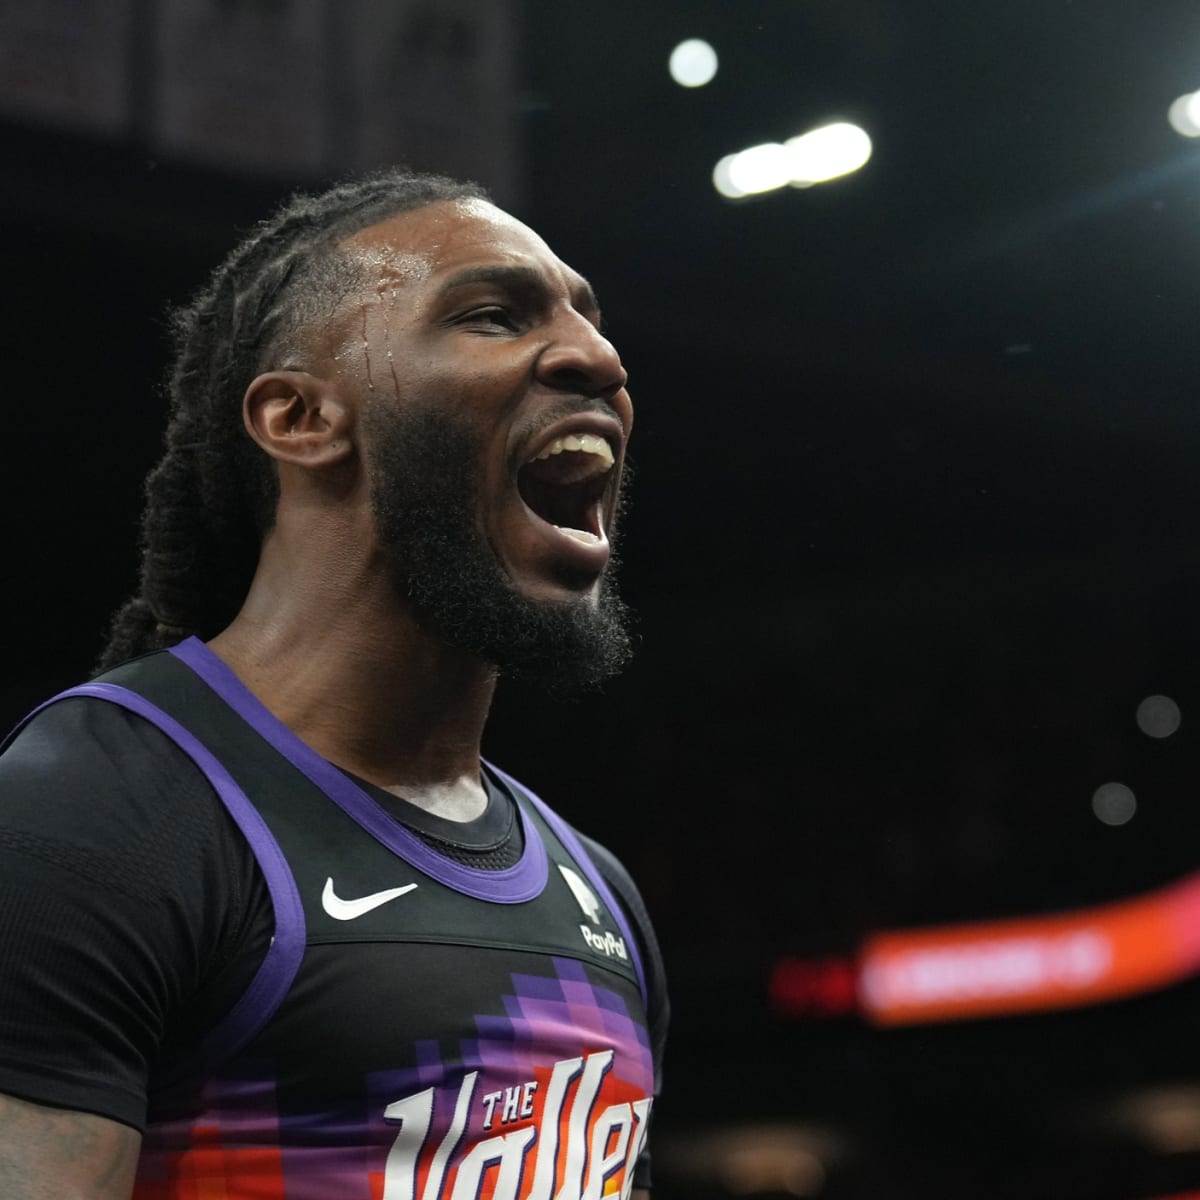 Jae Crowder can't figure out why he's getting so many death threats